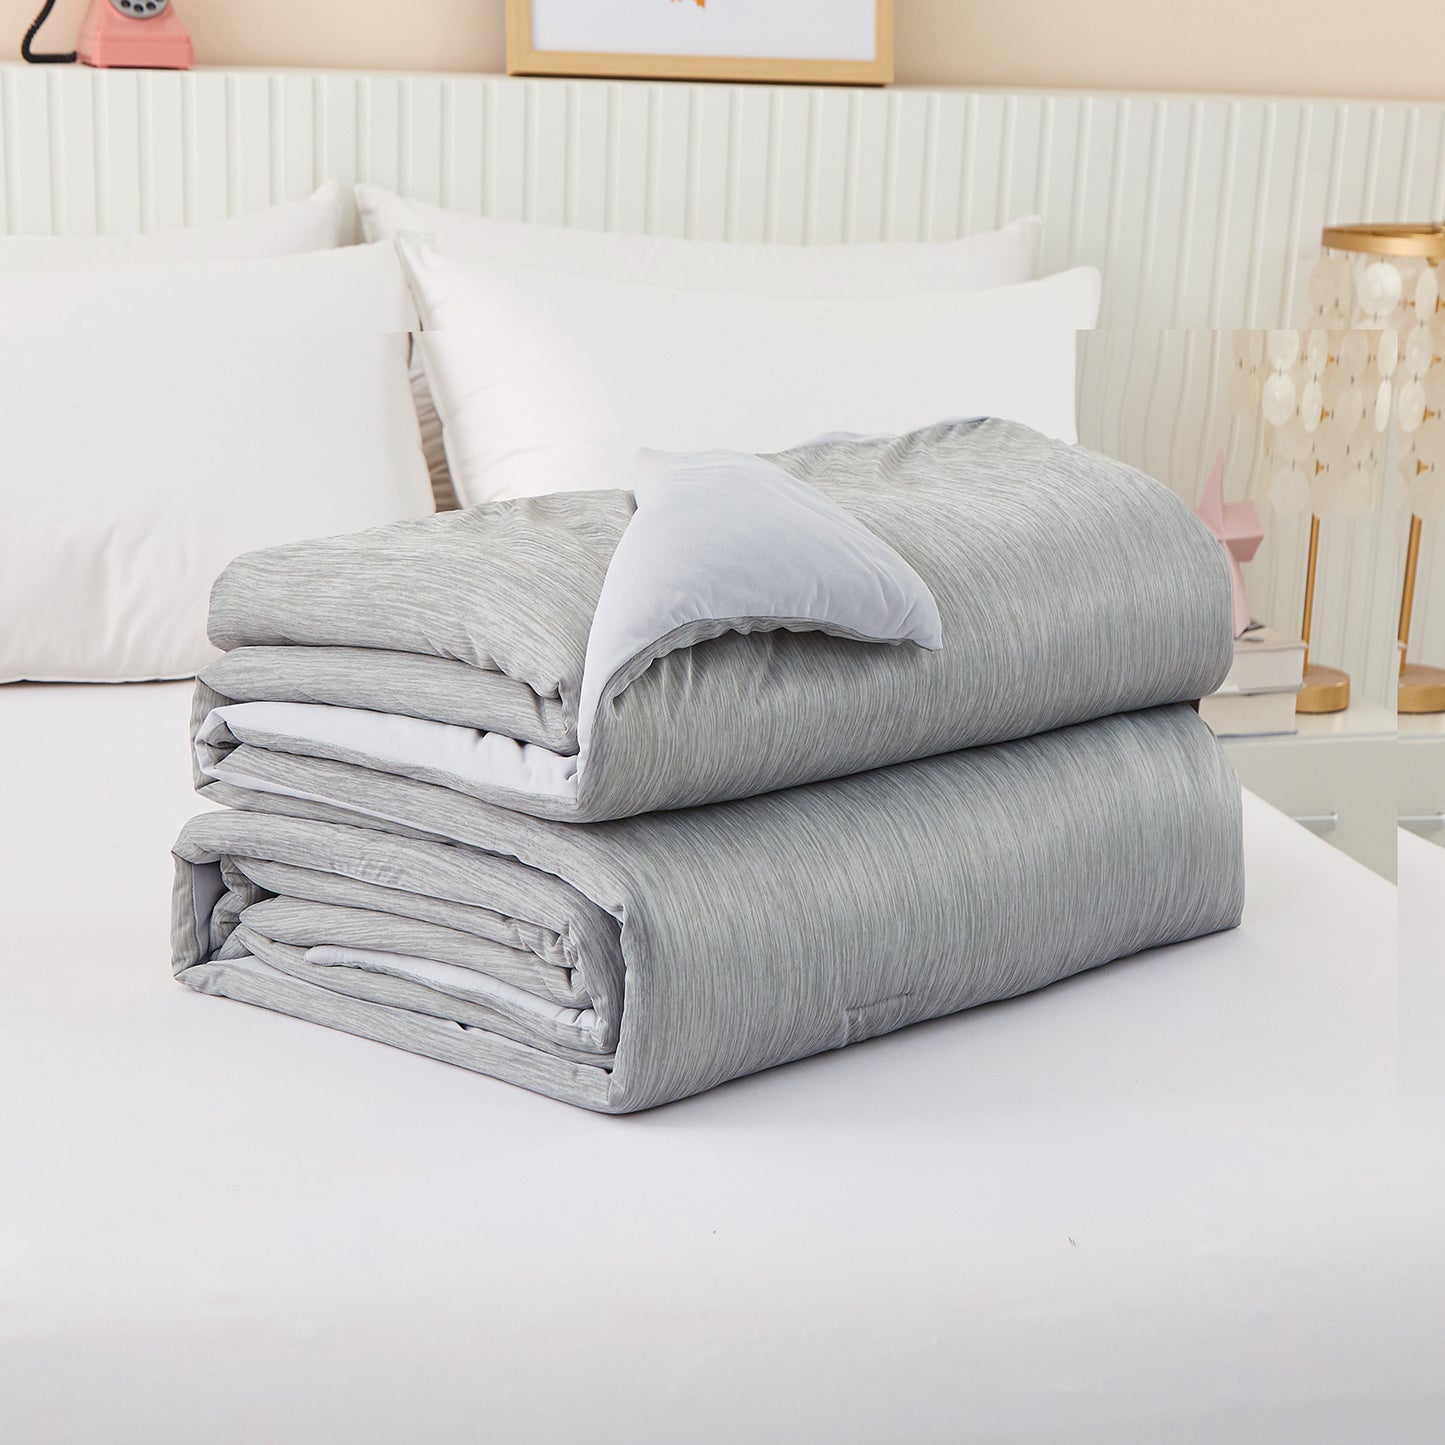 WONGS BEDDING Smooth, Comfortable and Cooling Duvet Cover